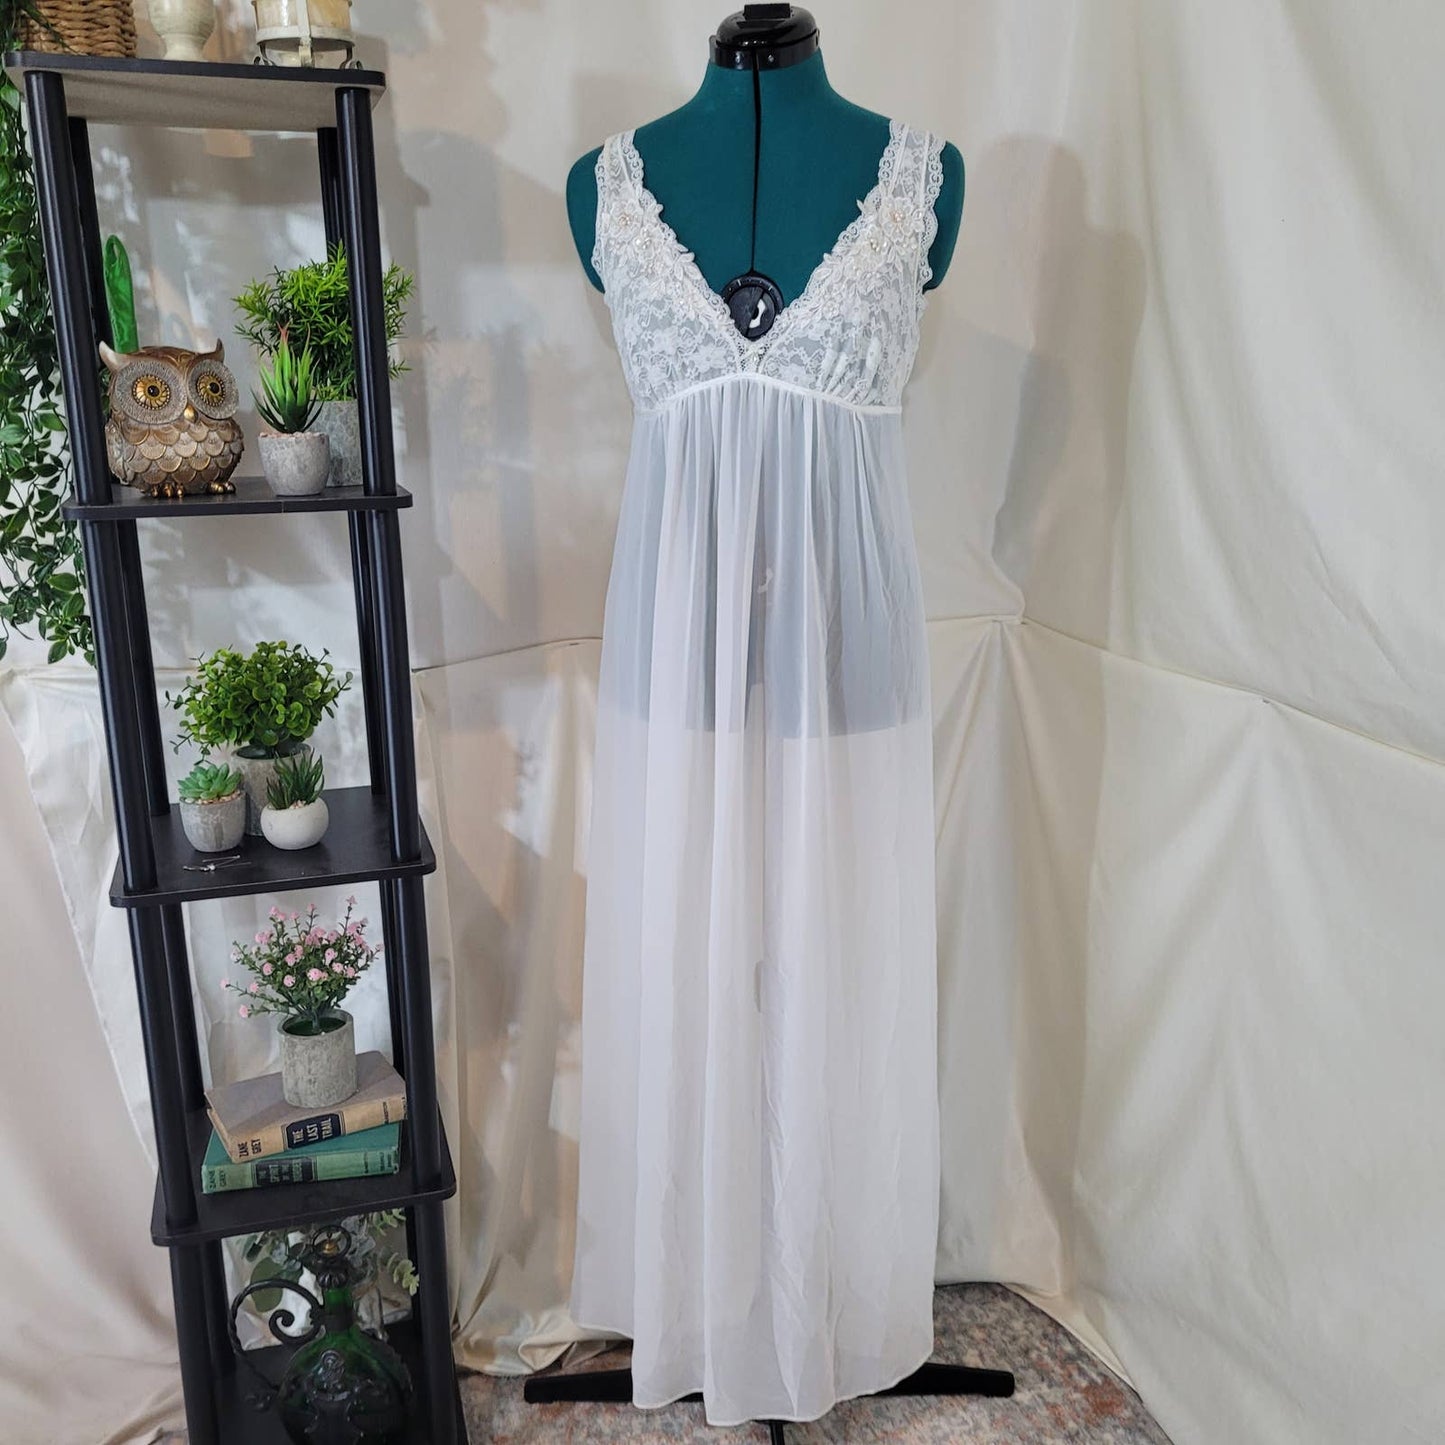 In Bloom by Jonquil Bridal Sheer Ivory Nightgown - Size Large